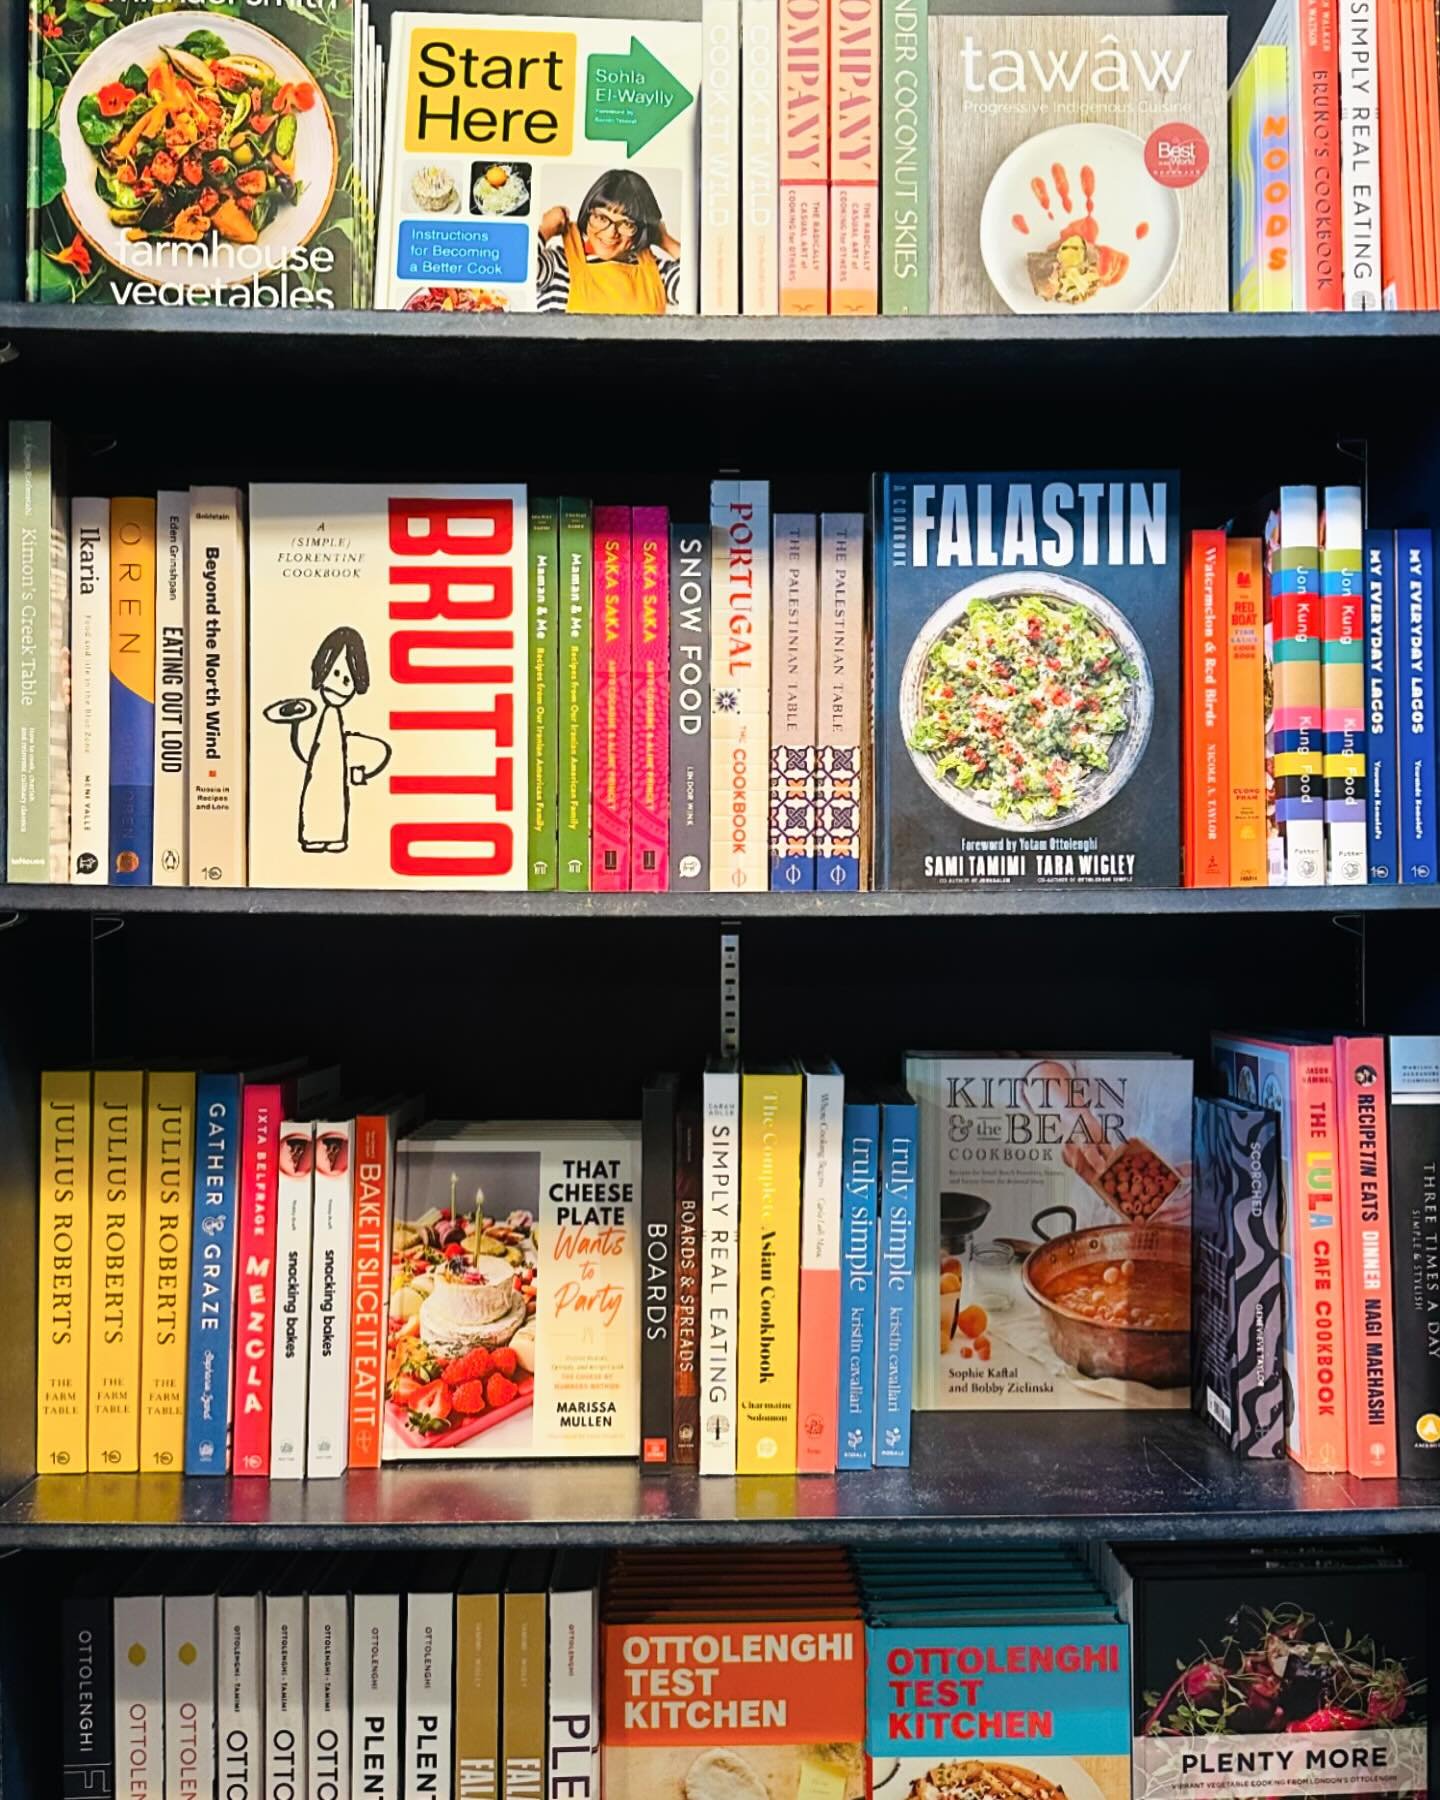 ✨📚Did you know that today is Canadian Independent Bookstore Day?

We ❤️ books! Our shelves are filled with all sorts of beautiful cookbooks and delicious food reads. Come by and find your new favourite, along with some specialty ingredients and gour